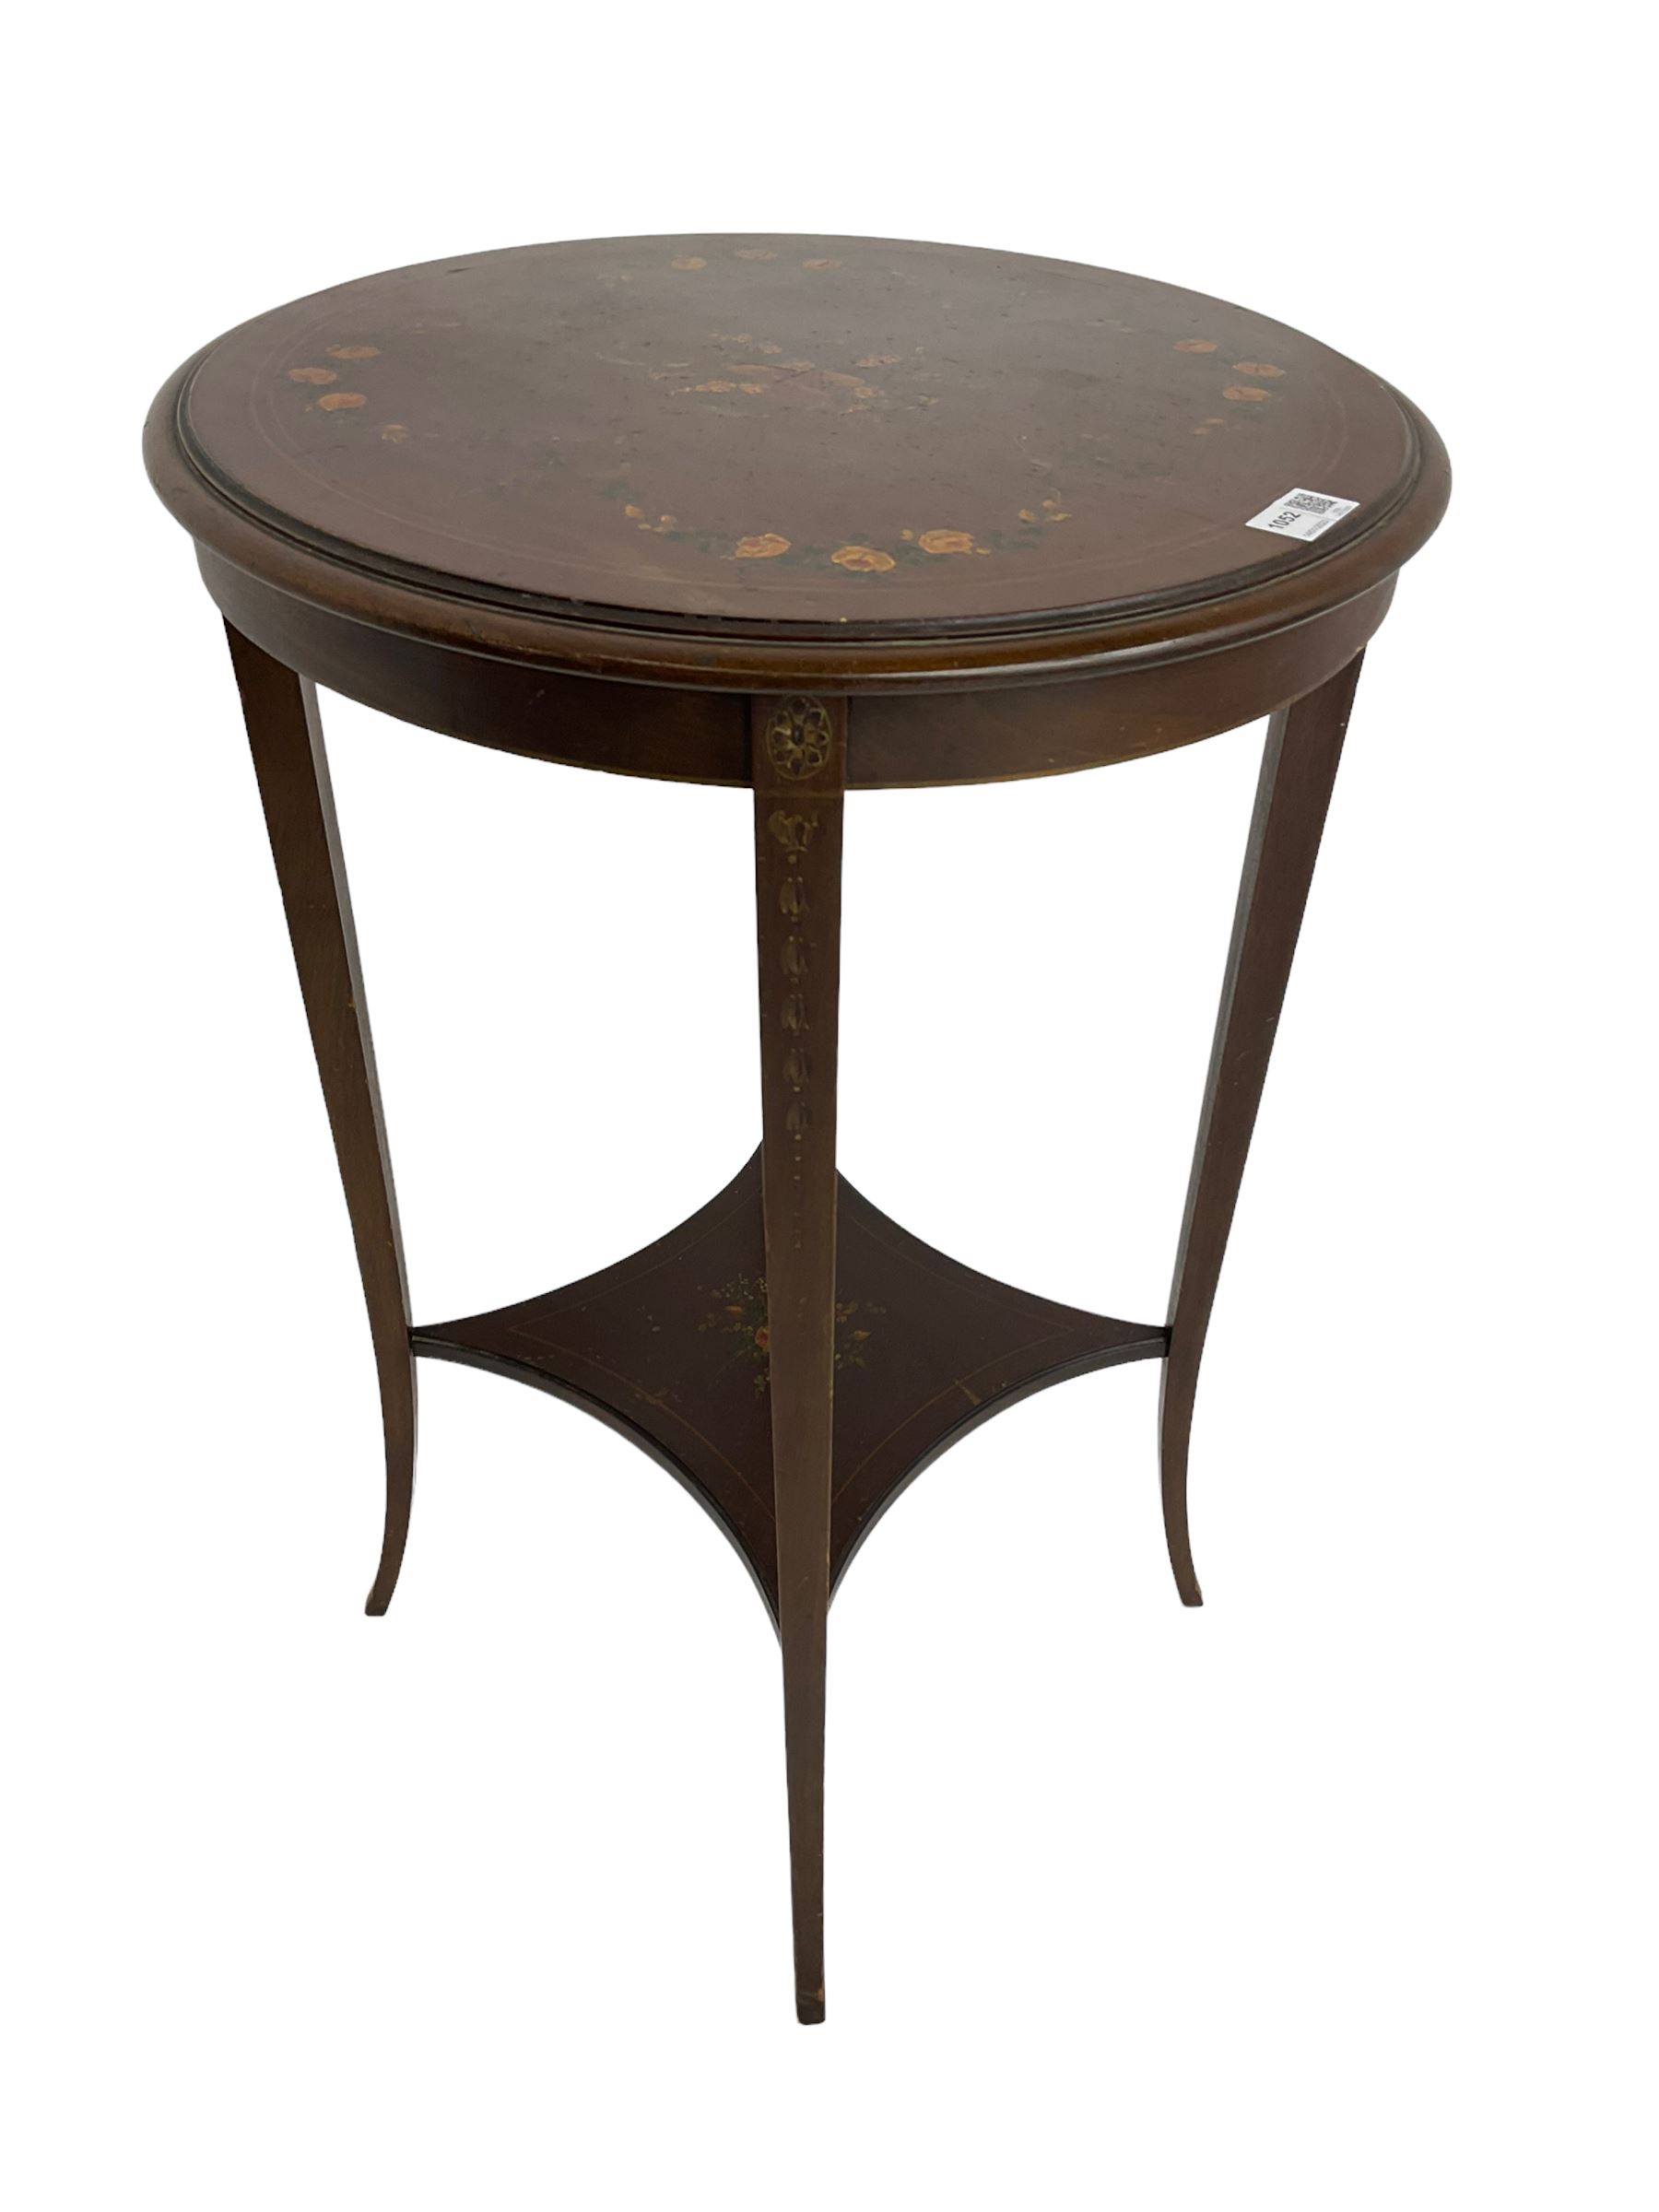 Greenwood and Sons York - early 20th century mahogany side or lamp table